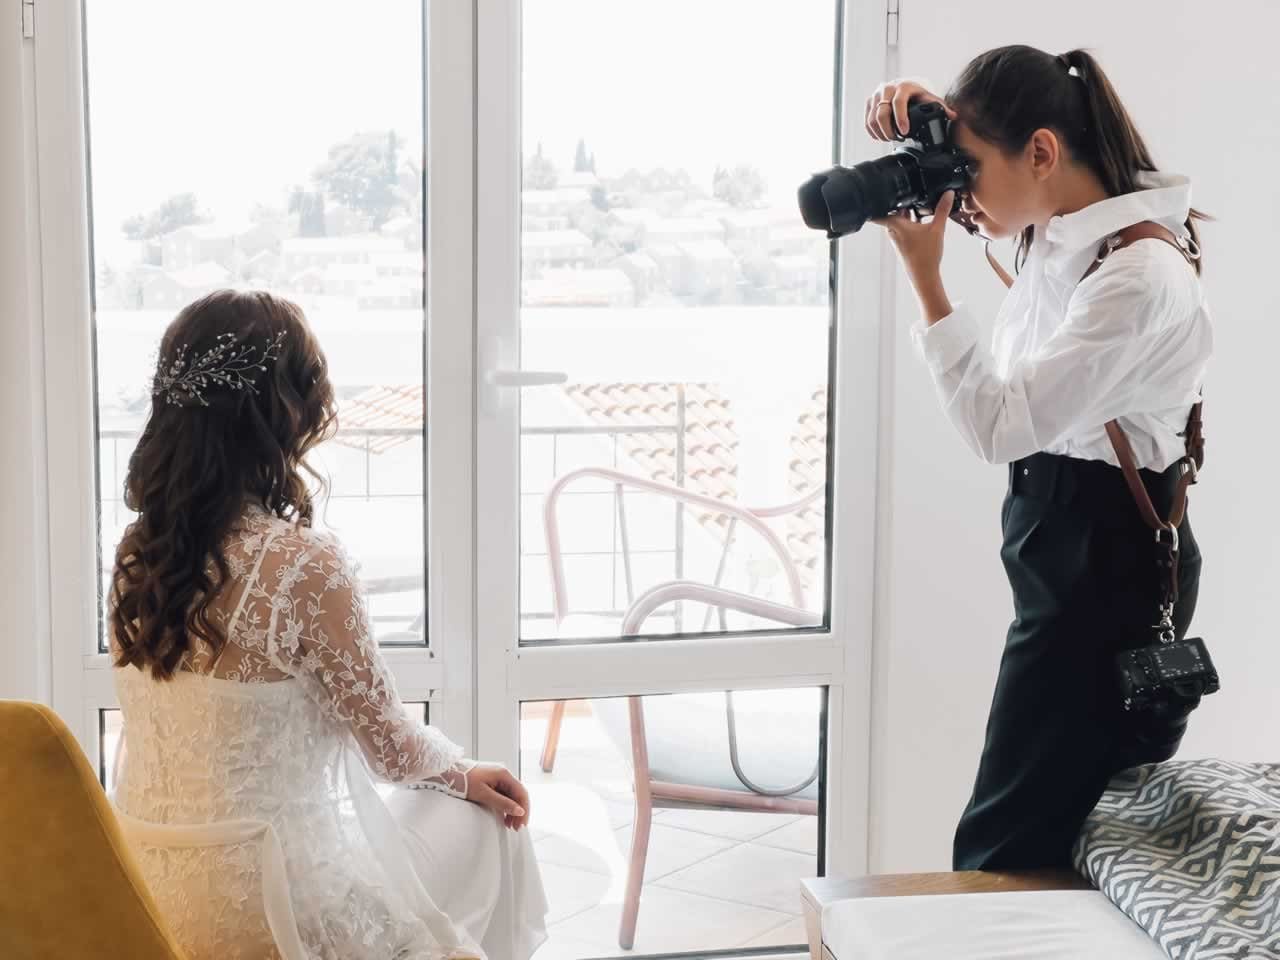 Behind the Scenes: A Day in the Life of a Vow Renewal Photographer